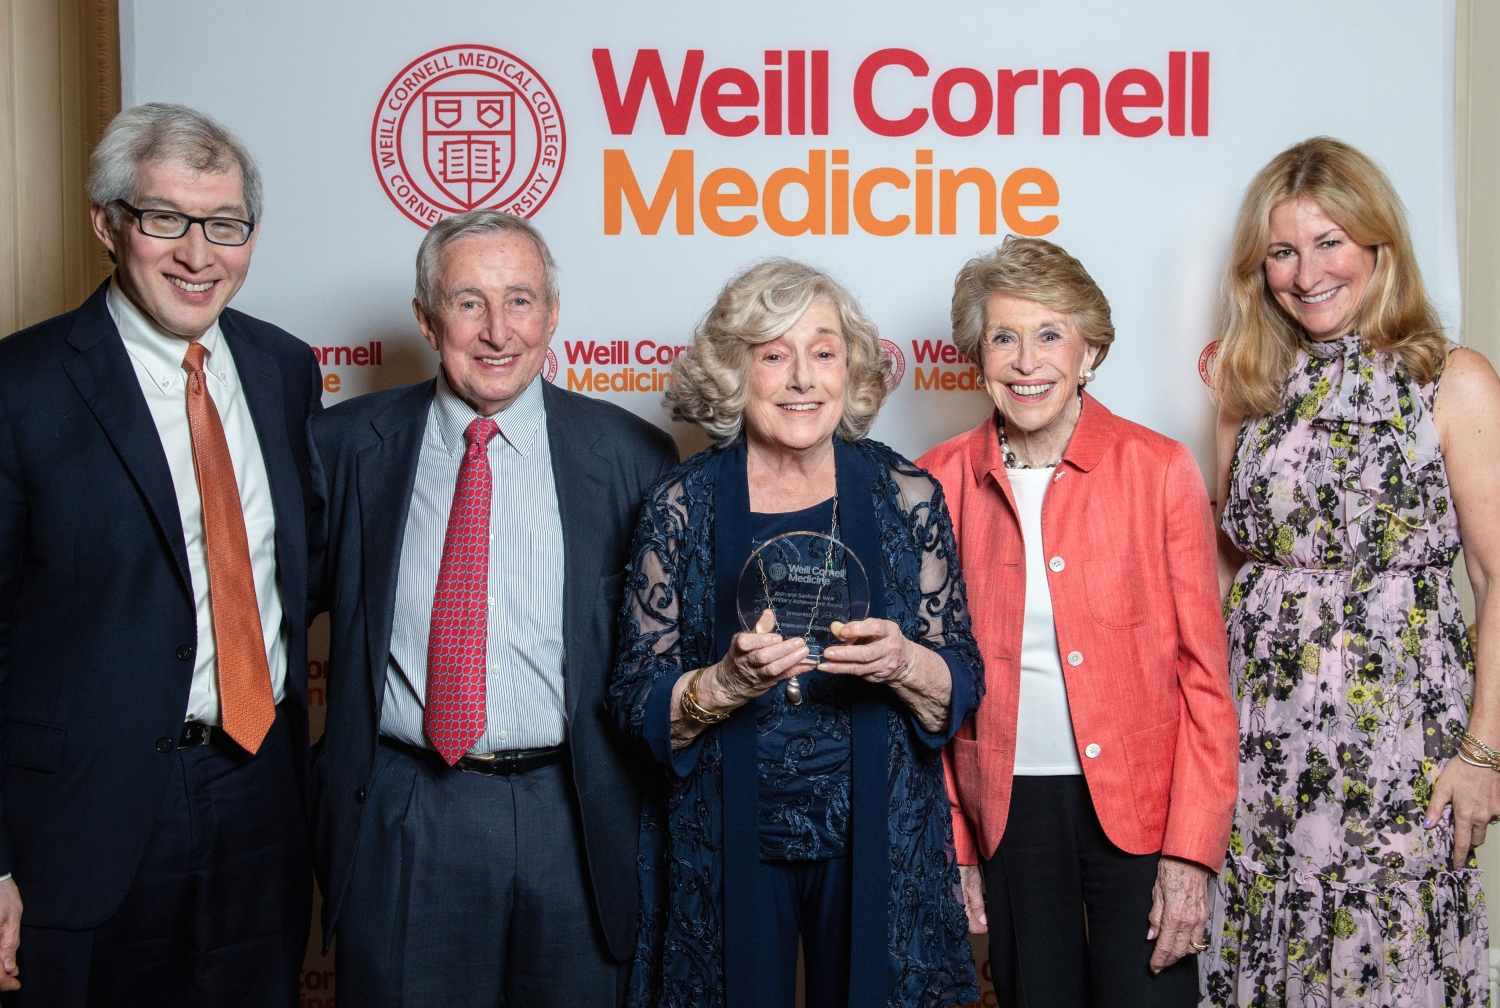 Five people pose for a group shot behind a Weill Cornell Medicine backdrop